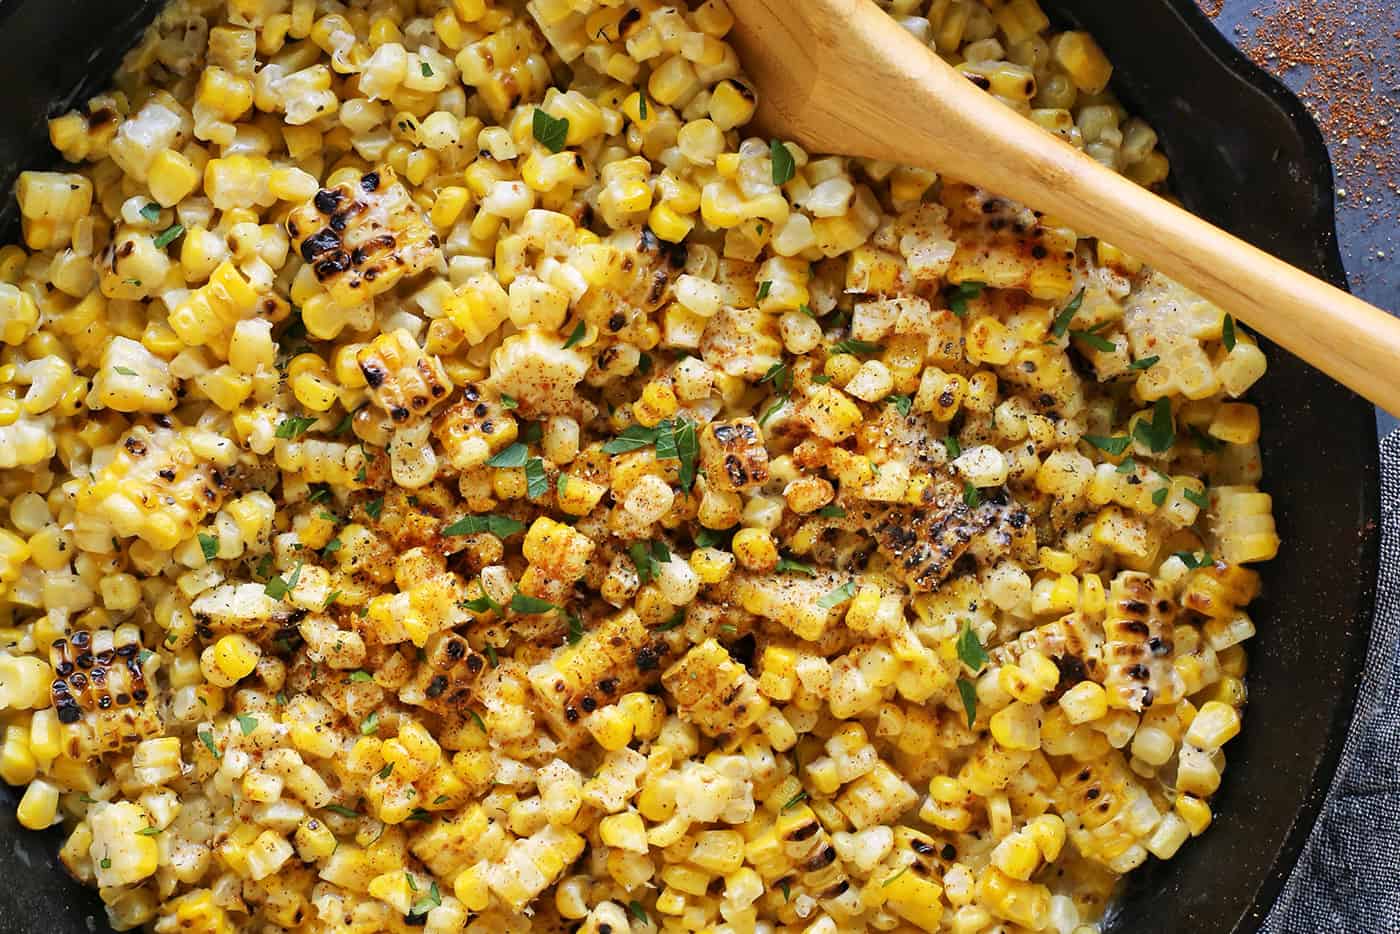 Close-up of grilled creamed corn in a skillet with a wooden spoon